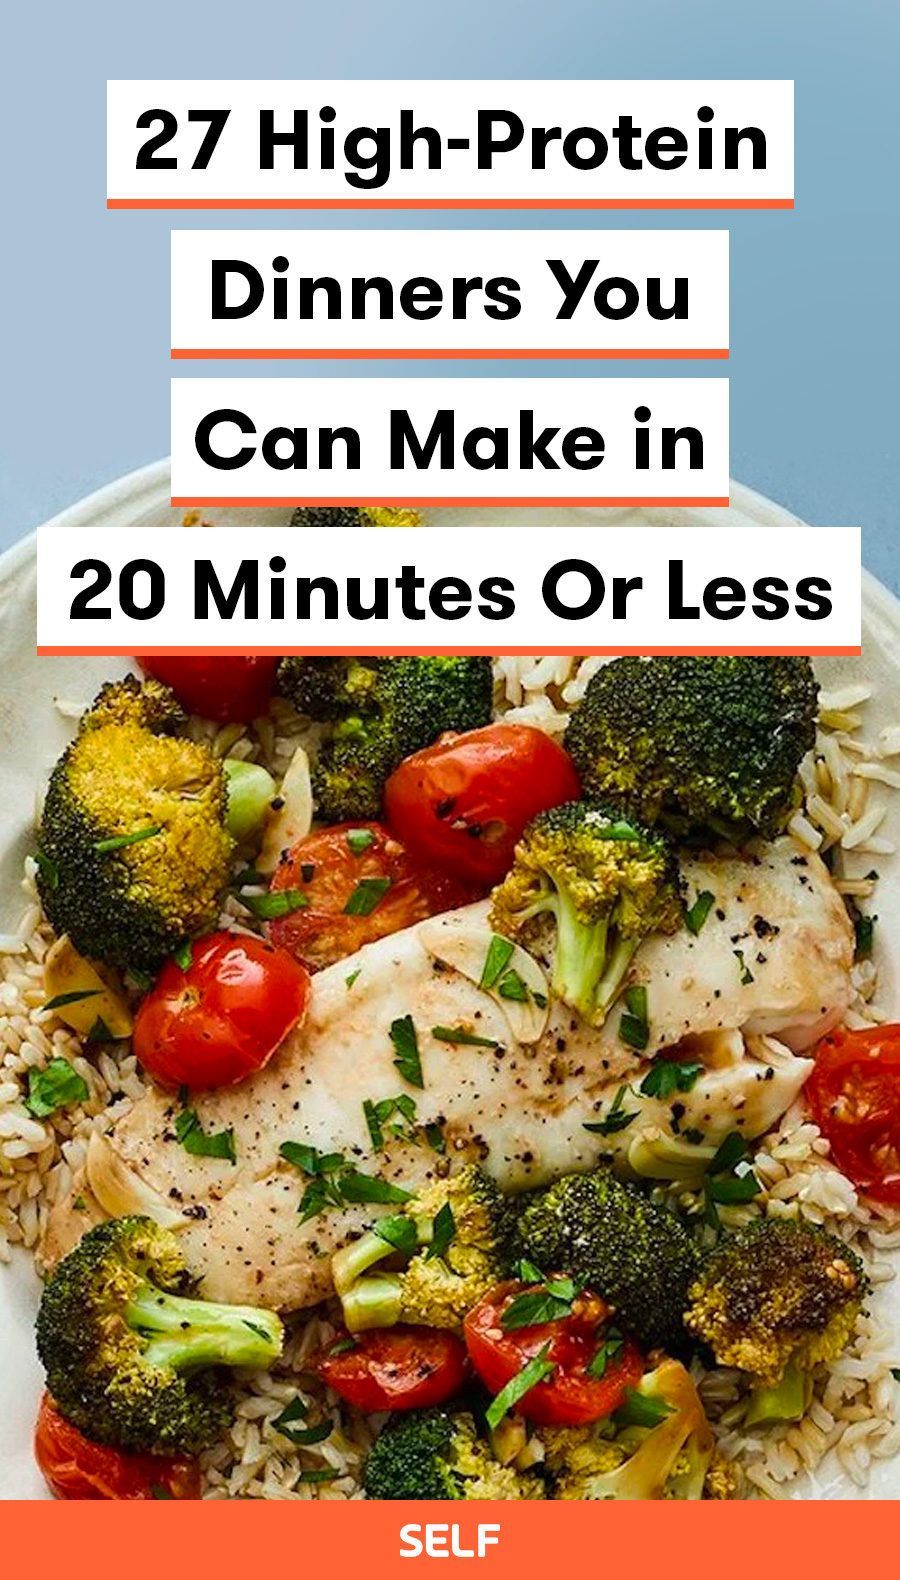 27 High-Protein Dinners You Can Make in 20 Minutes Or Less -   fitness Meals protein